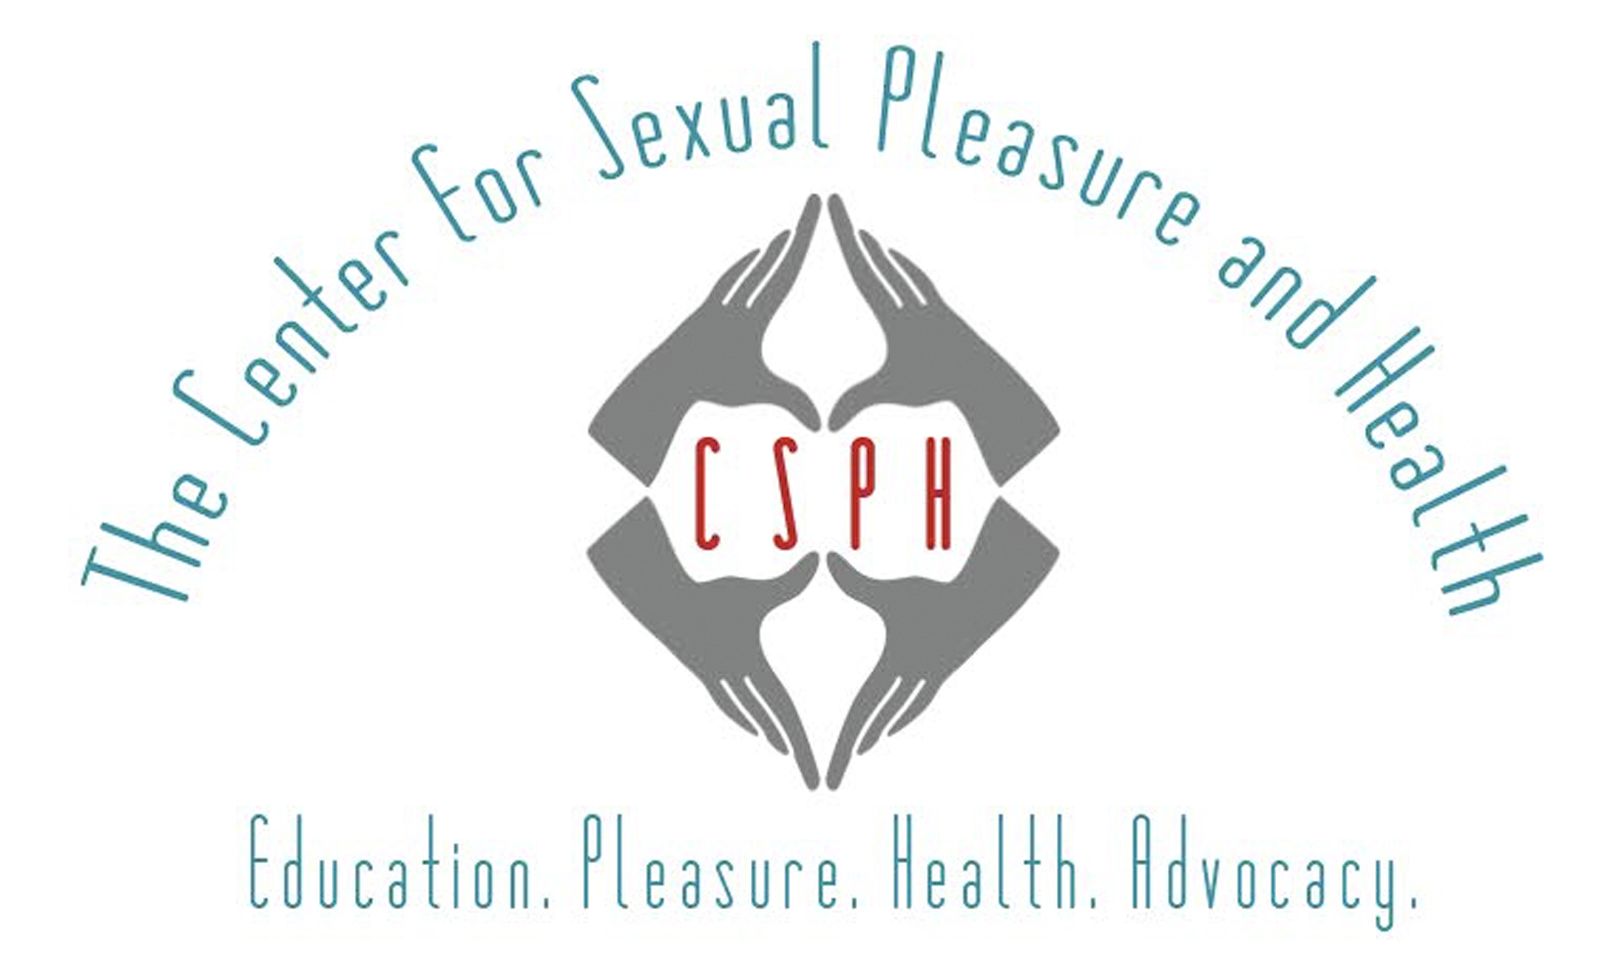 Kayla Wingert Tapped as Executive Director of Center for Sexual Pleasure & Health